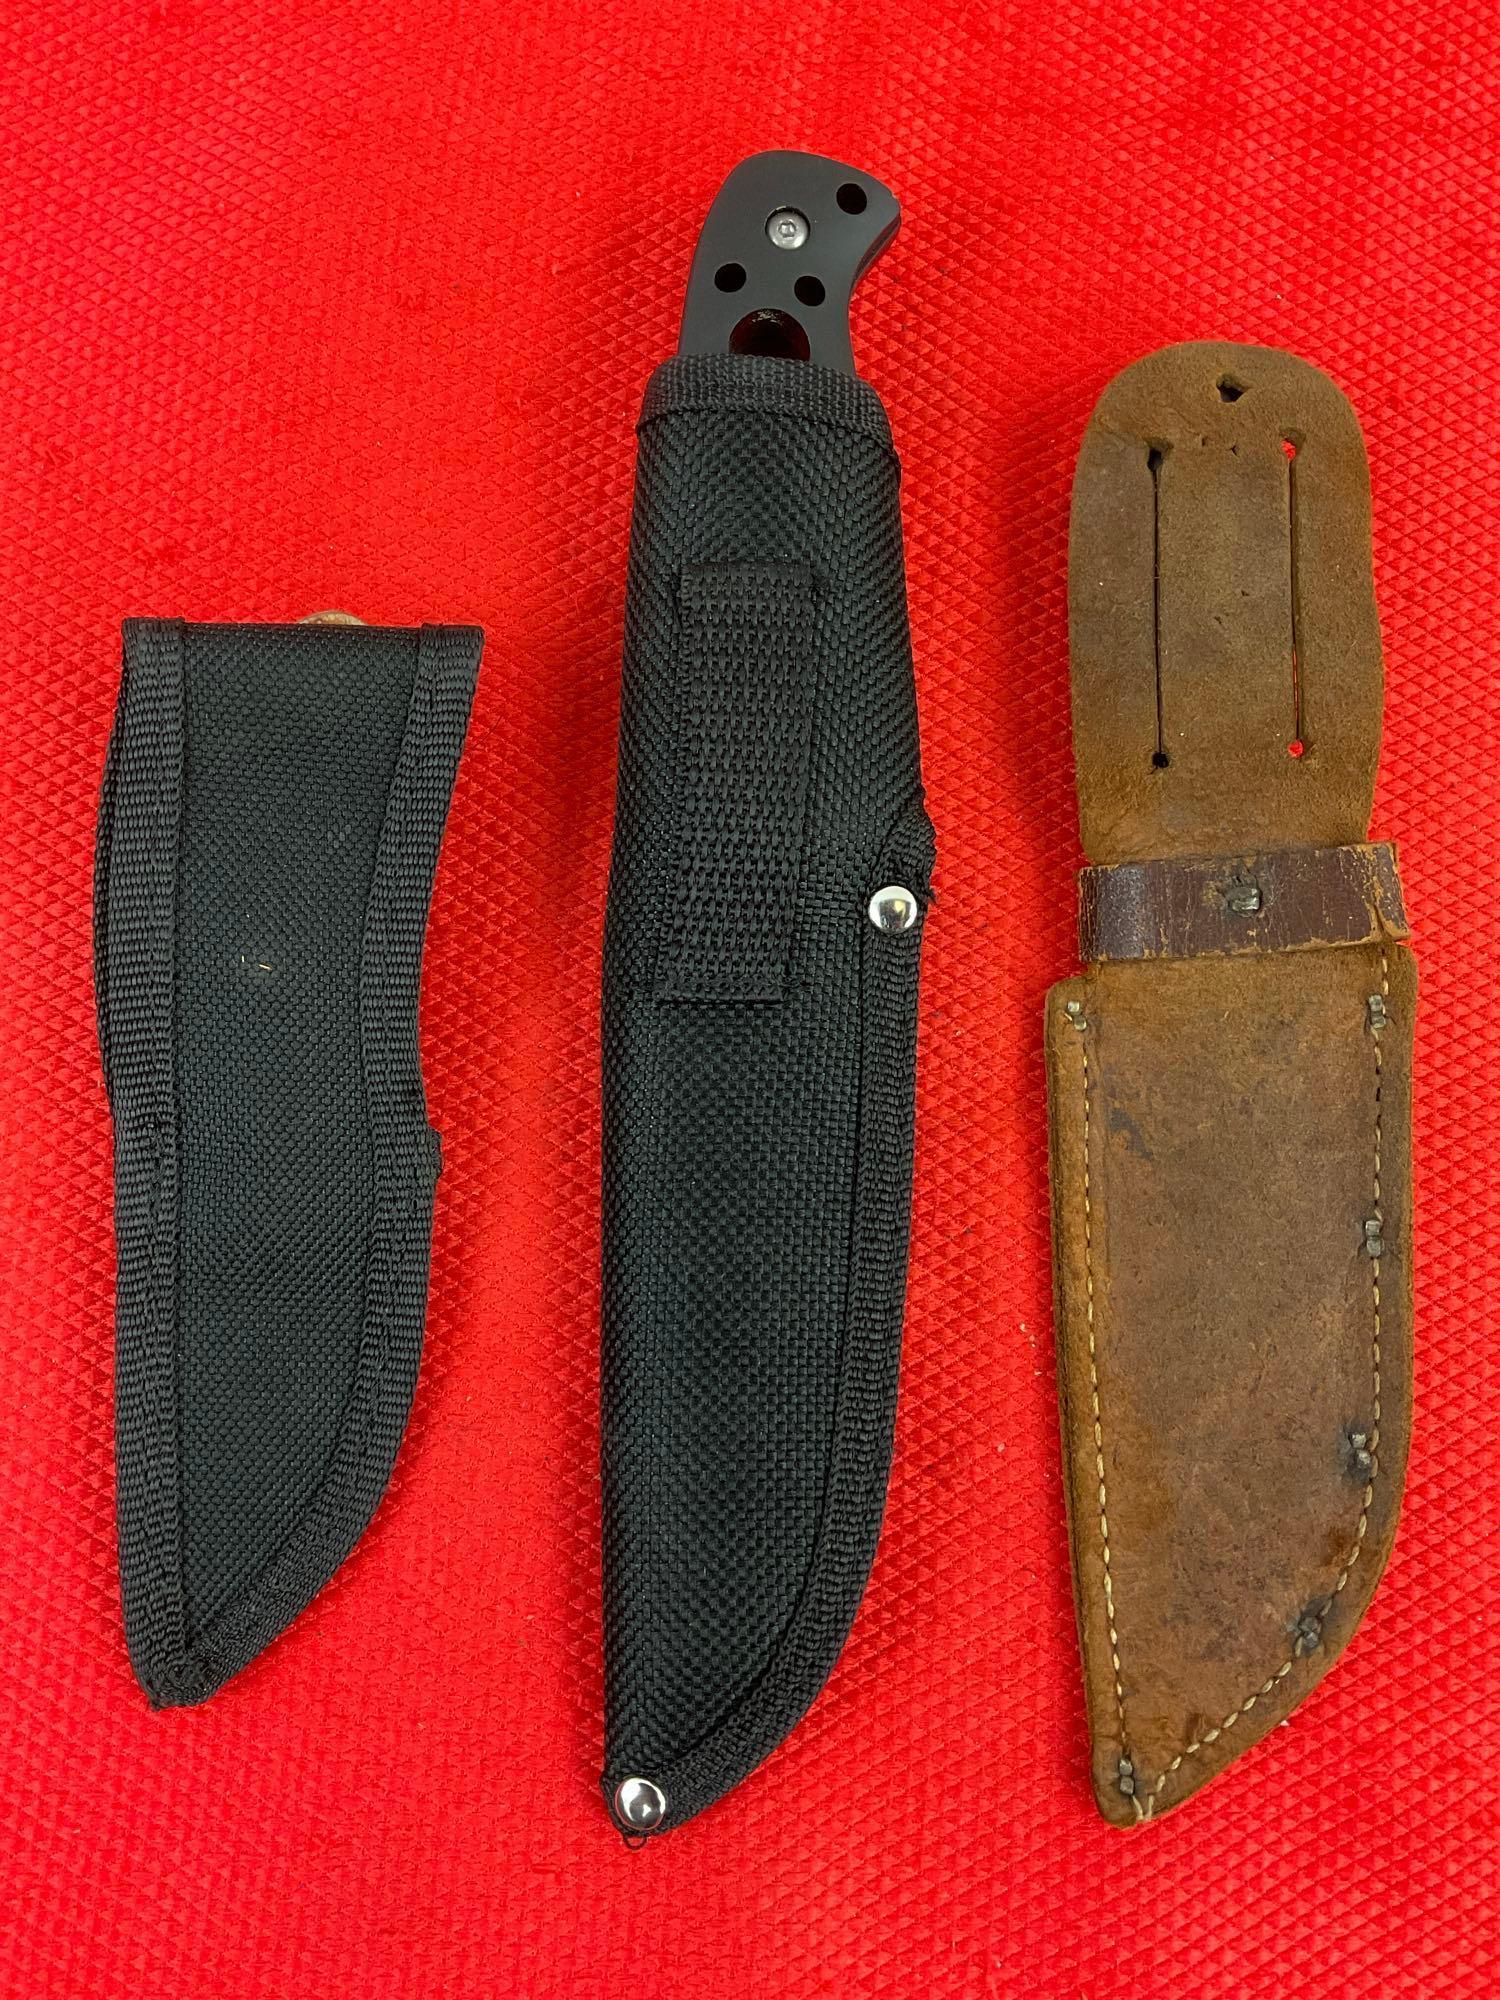 3 pcs Steel Fixed Blade Hunting Knives w/ Sheathes. 1x Sharper USA, 2x Unmarked. See pics.